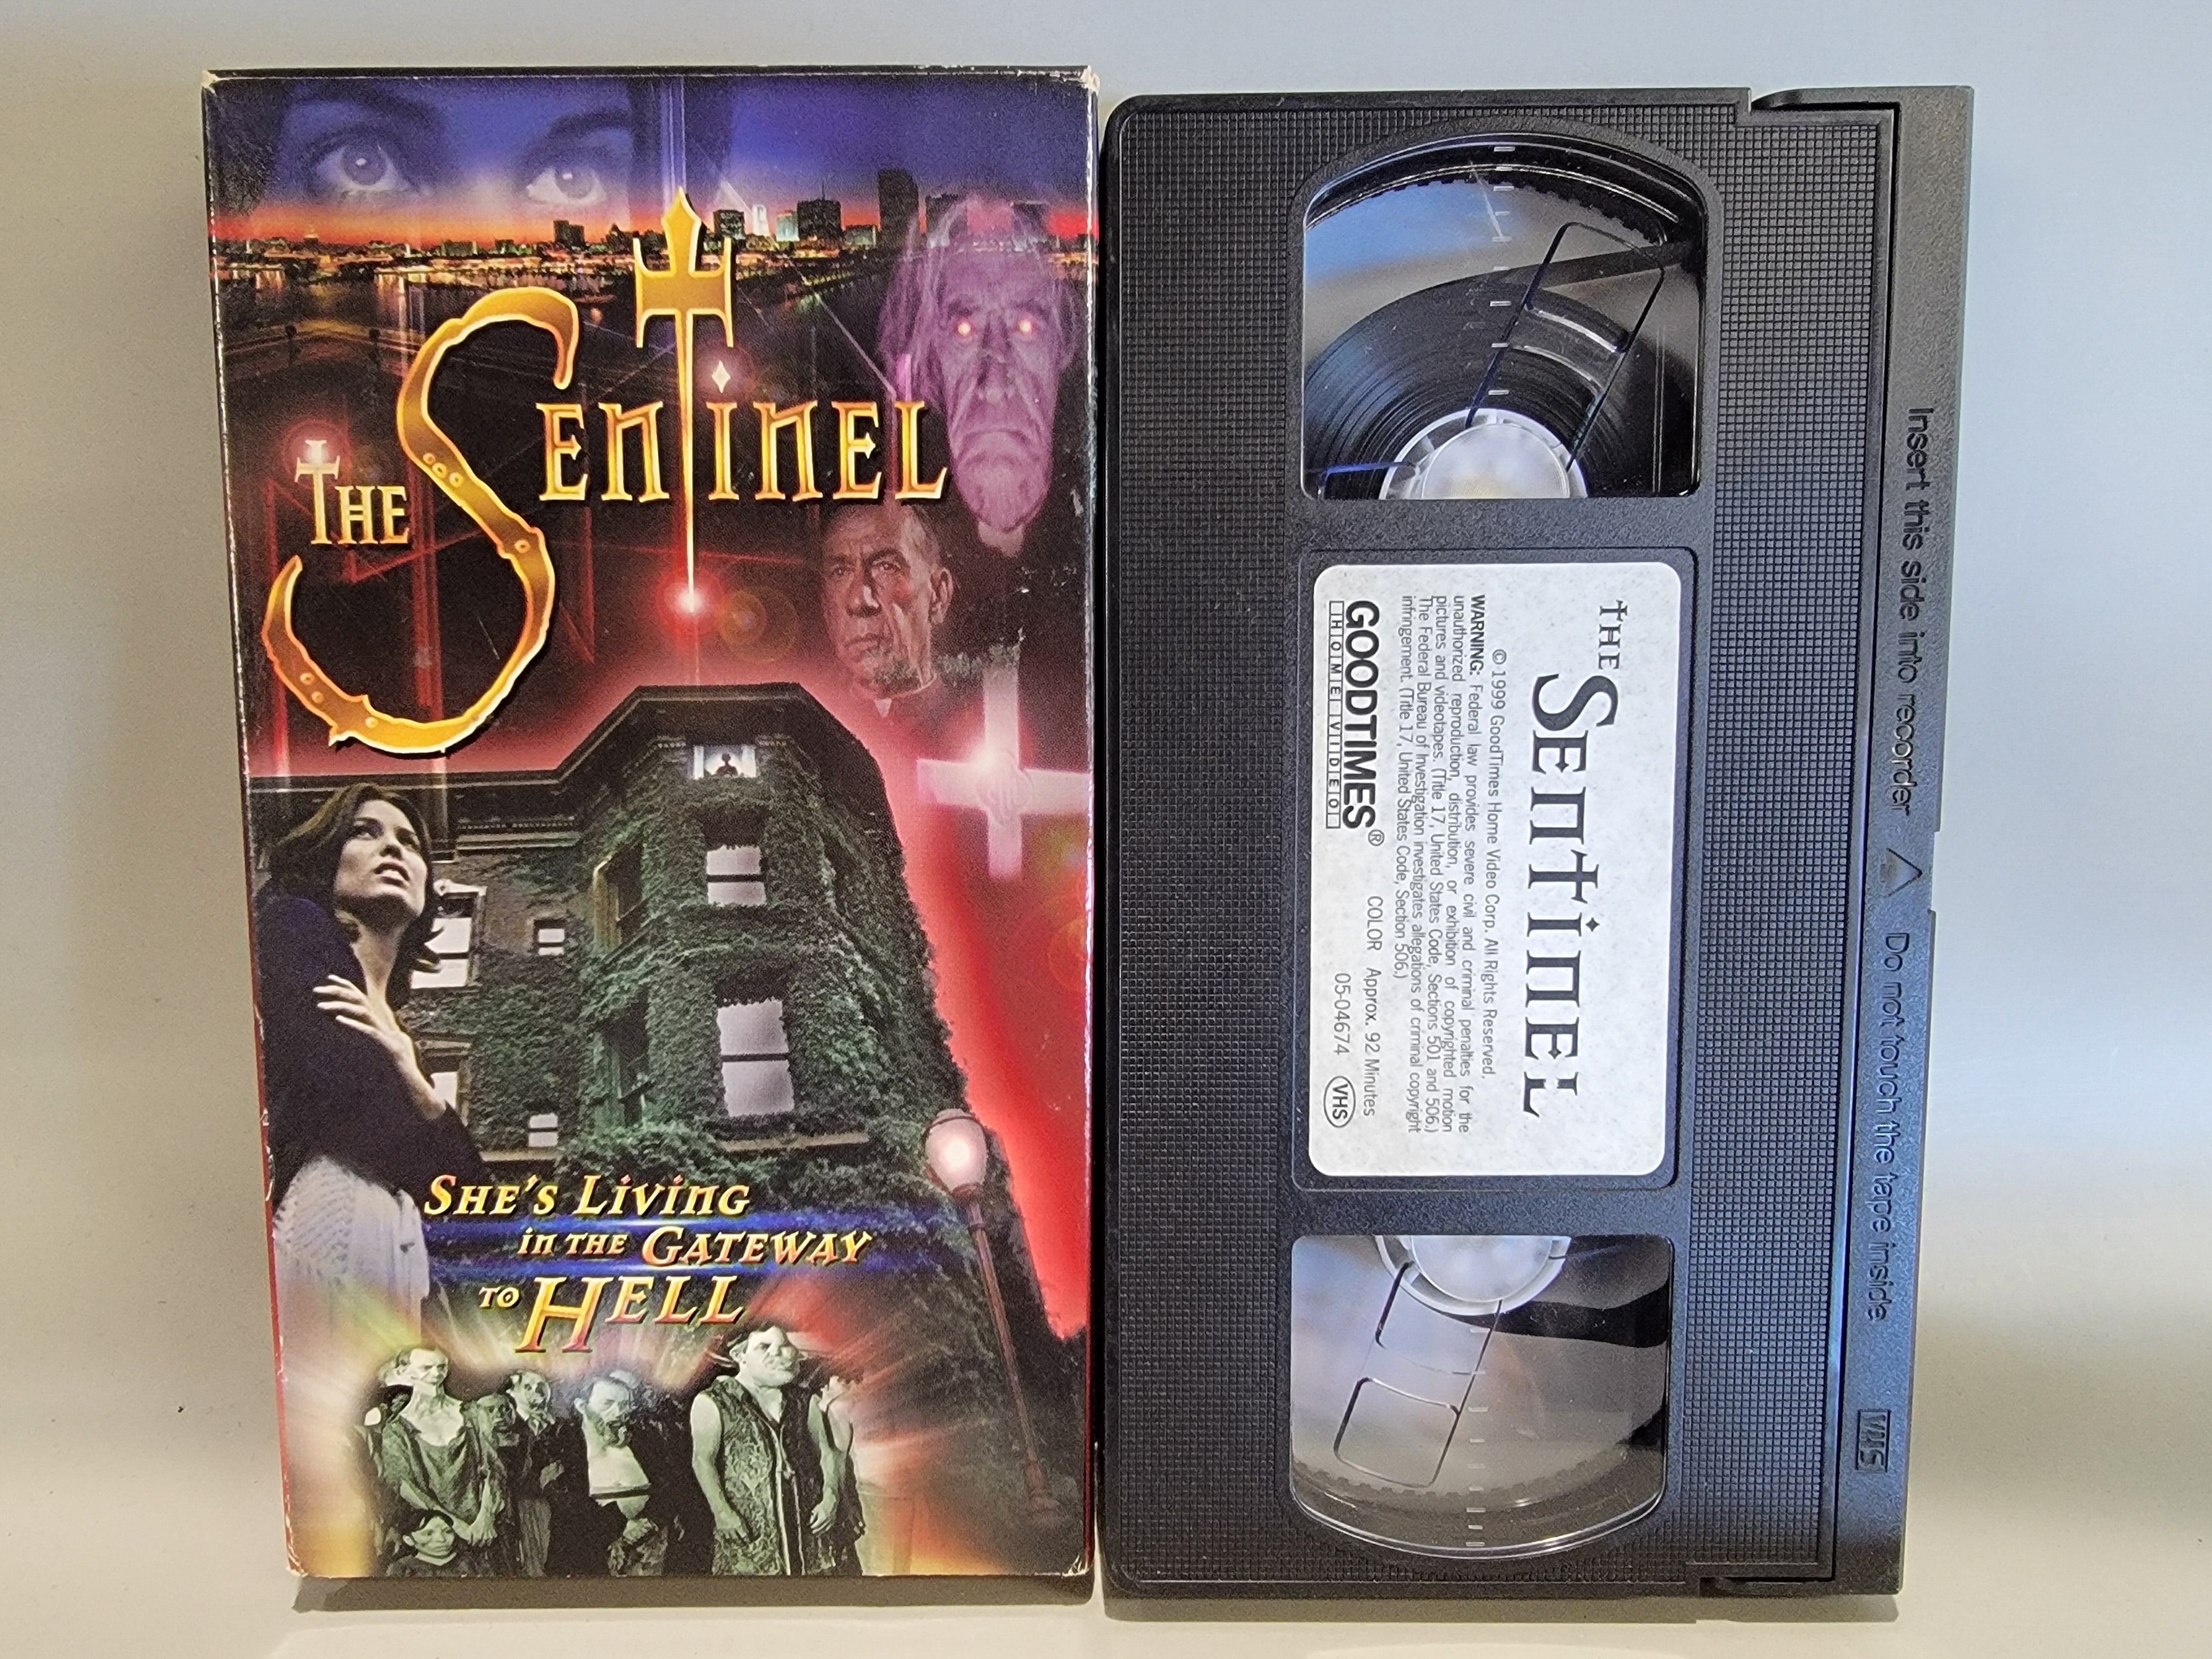 THE SENTINEL VHS [USED]